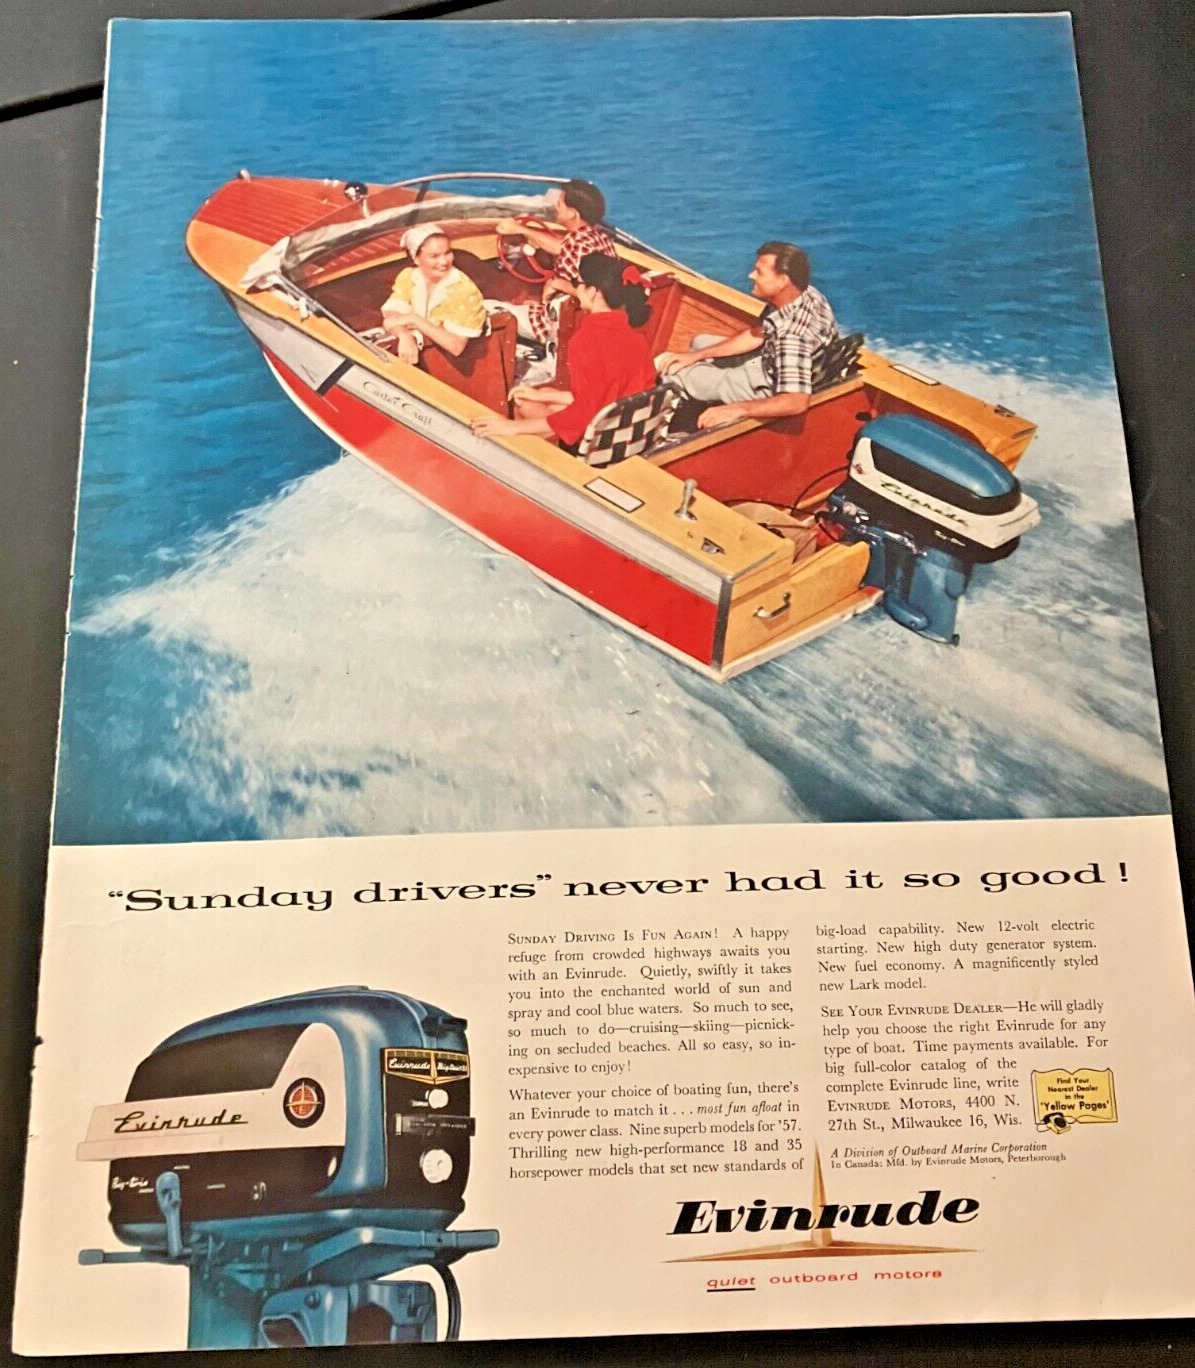 1957 Evinrude Quiet Outboard Motors - Vintage Boating Print Ad / Wall Art  CLEAN